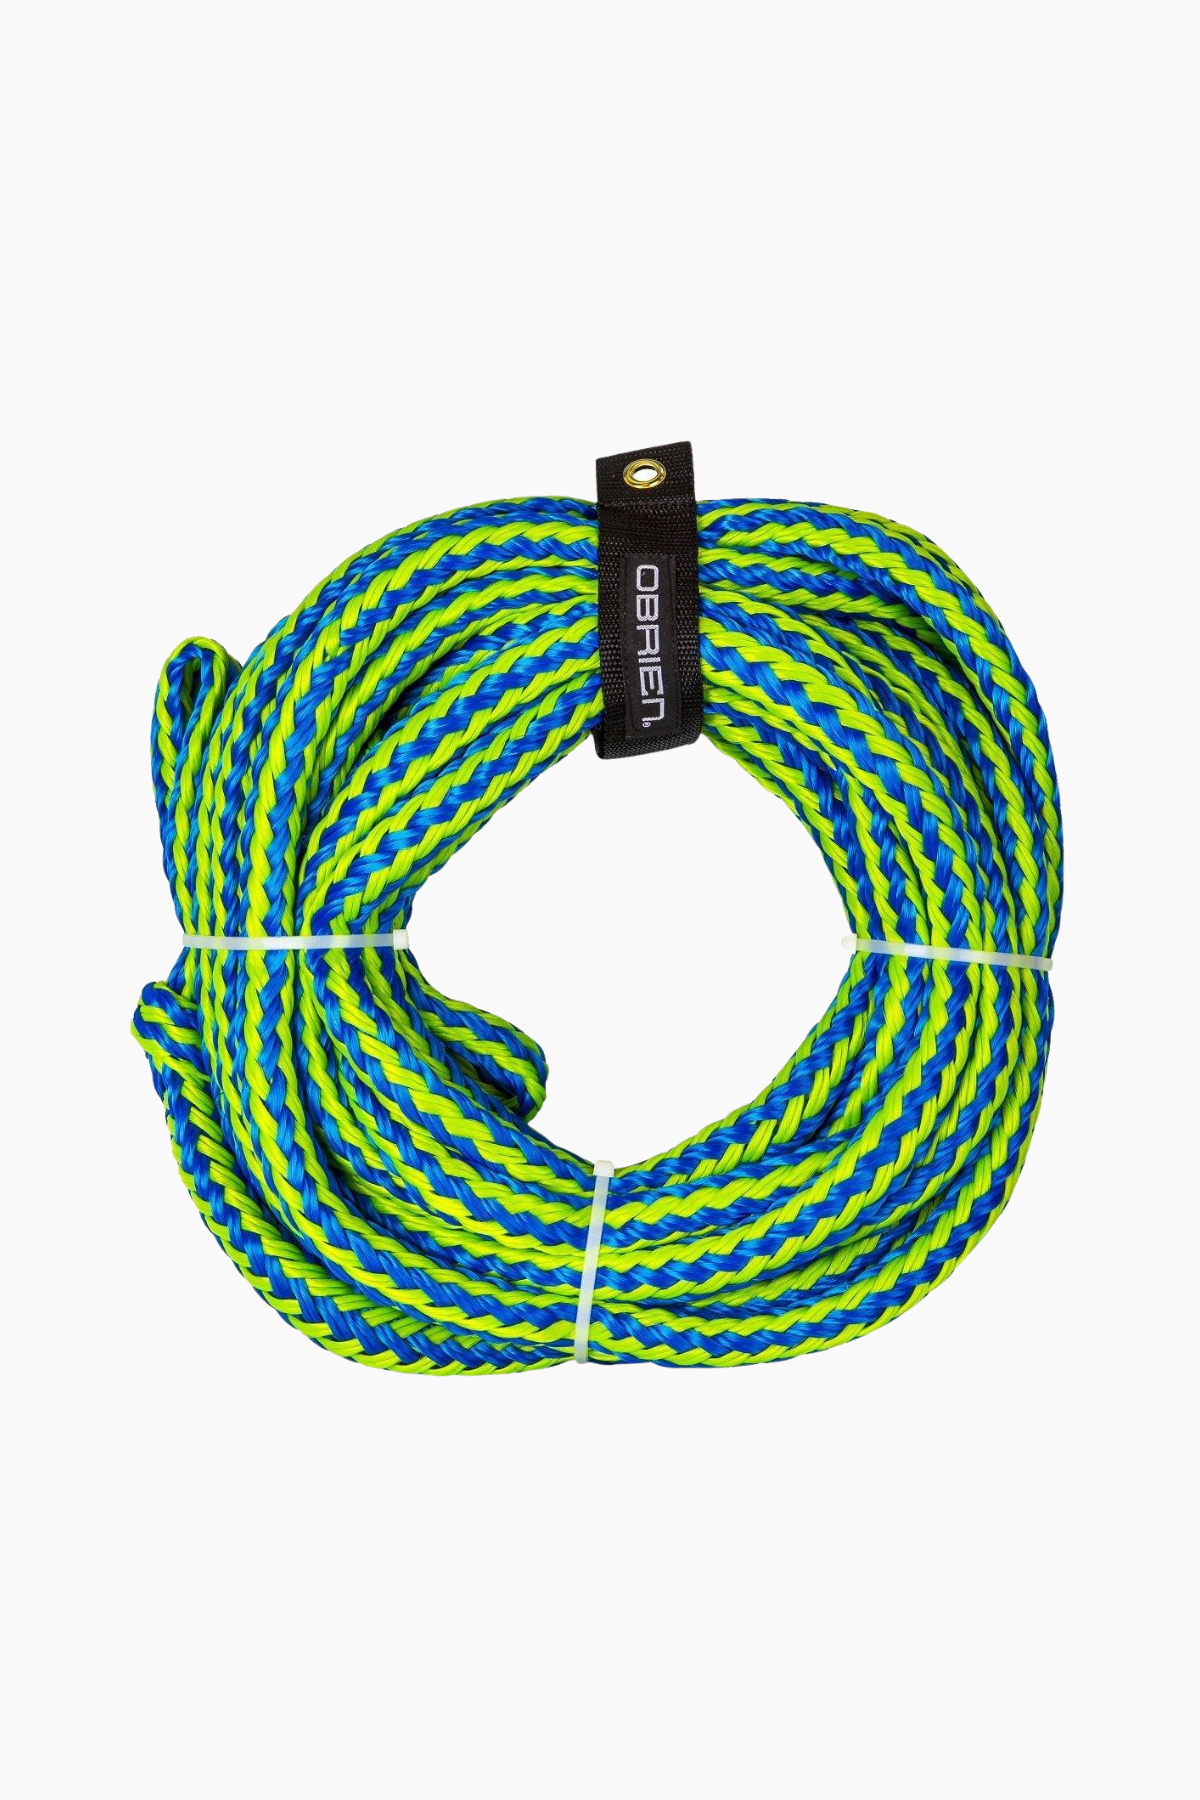 O'Brien 6 Rider Tow Rope - Cottage Toys Canada